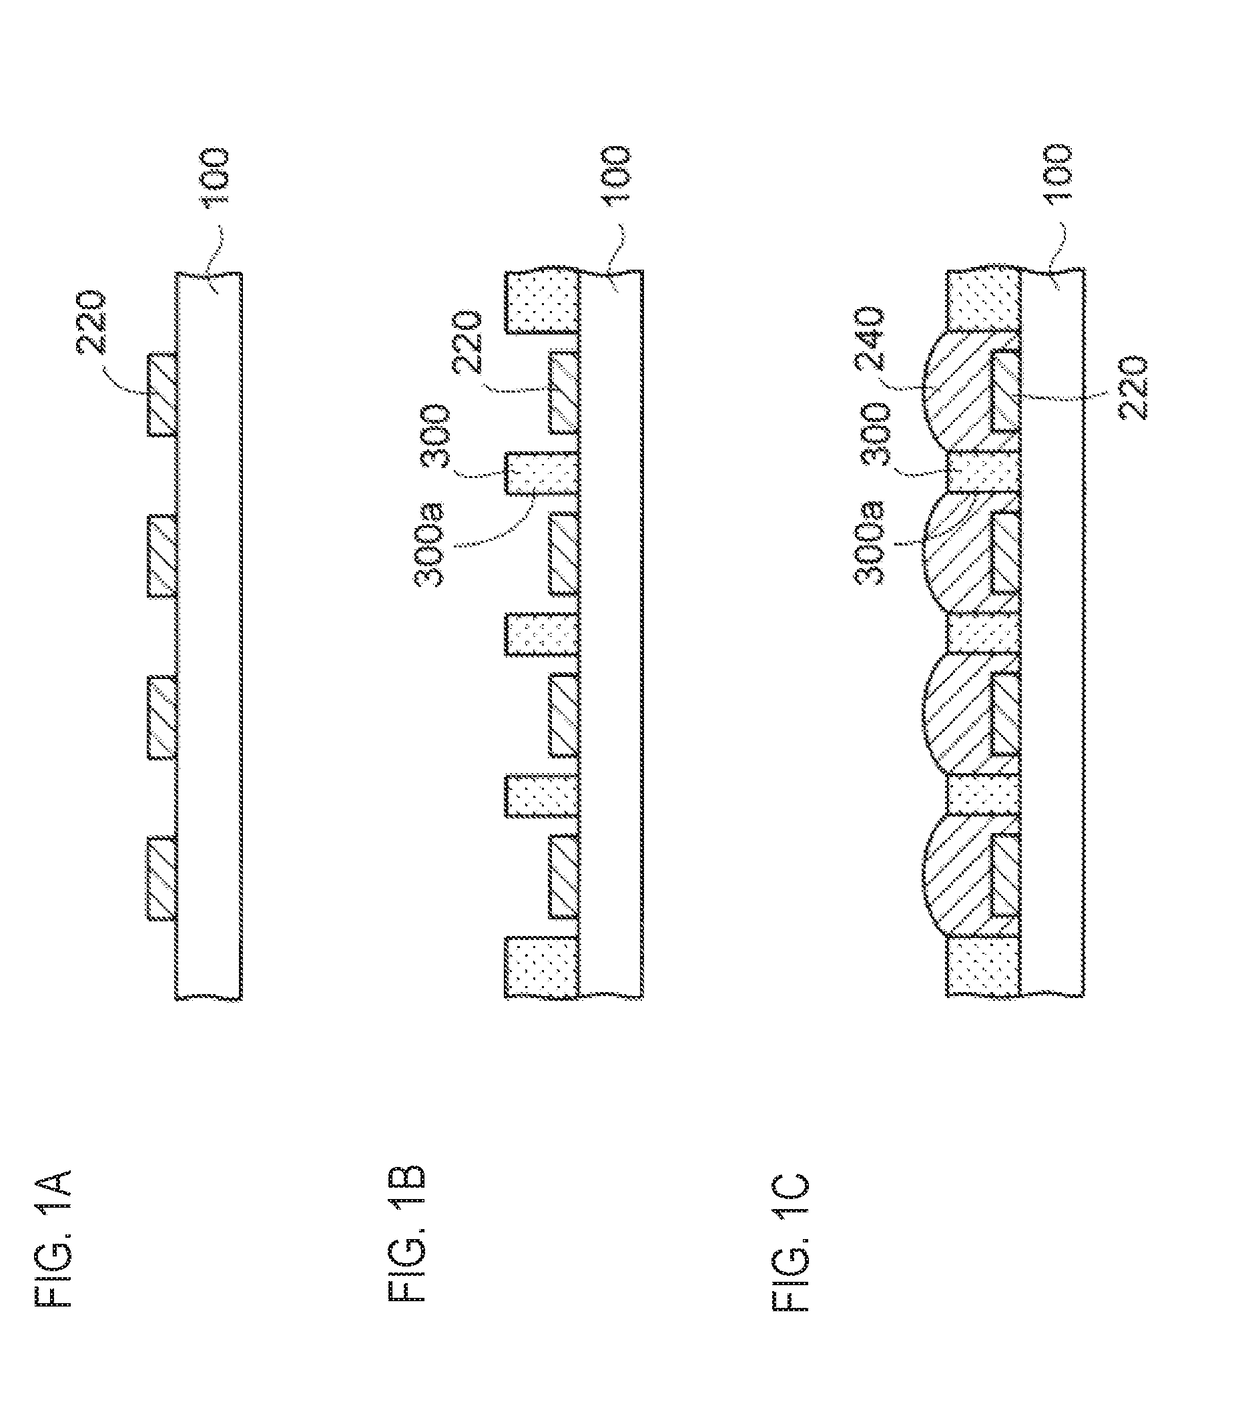 Inductor device